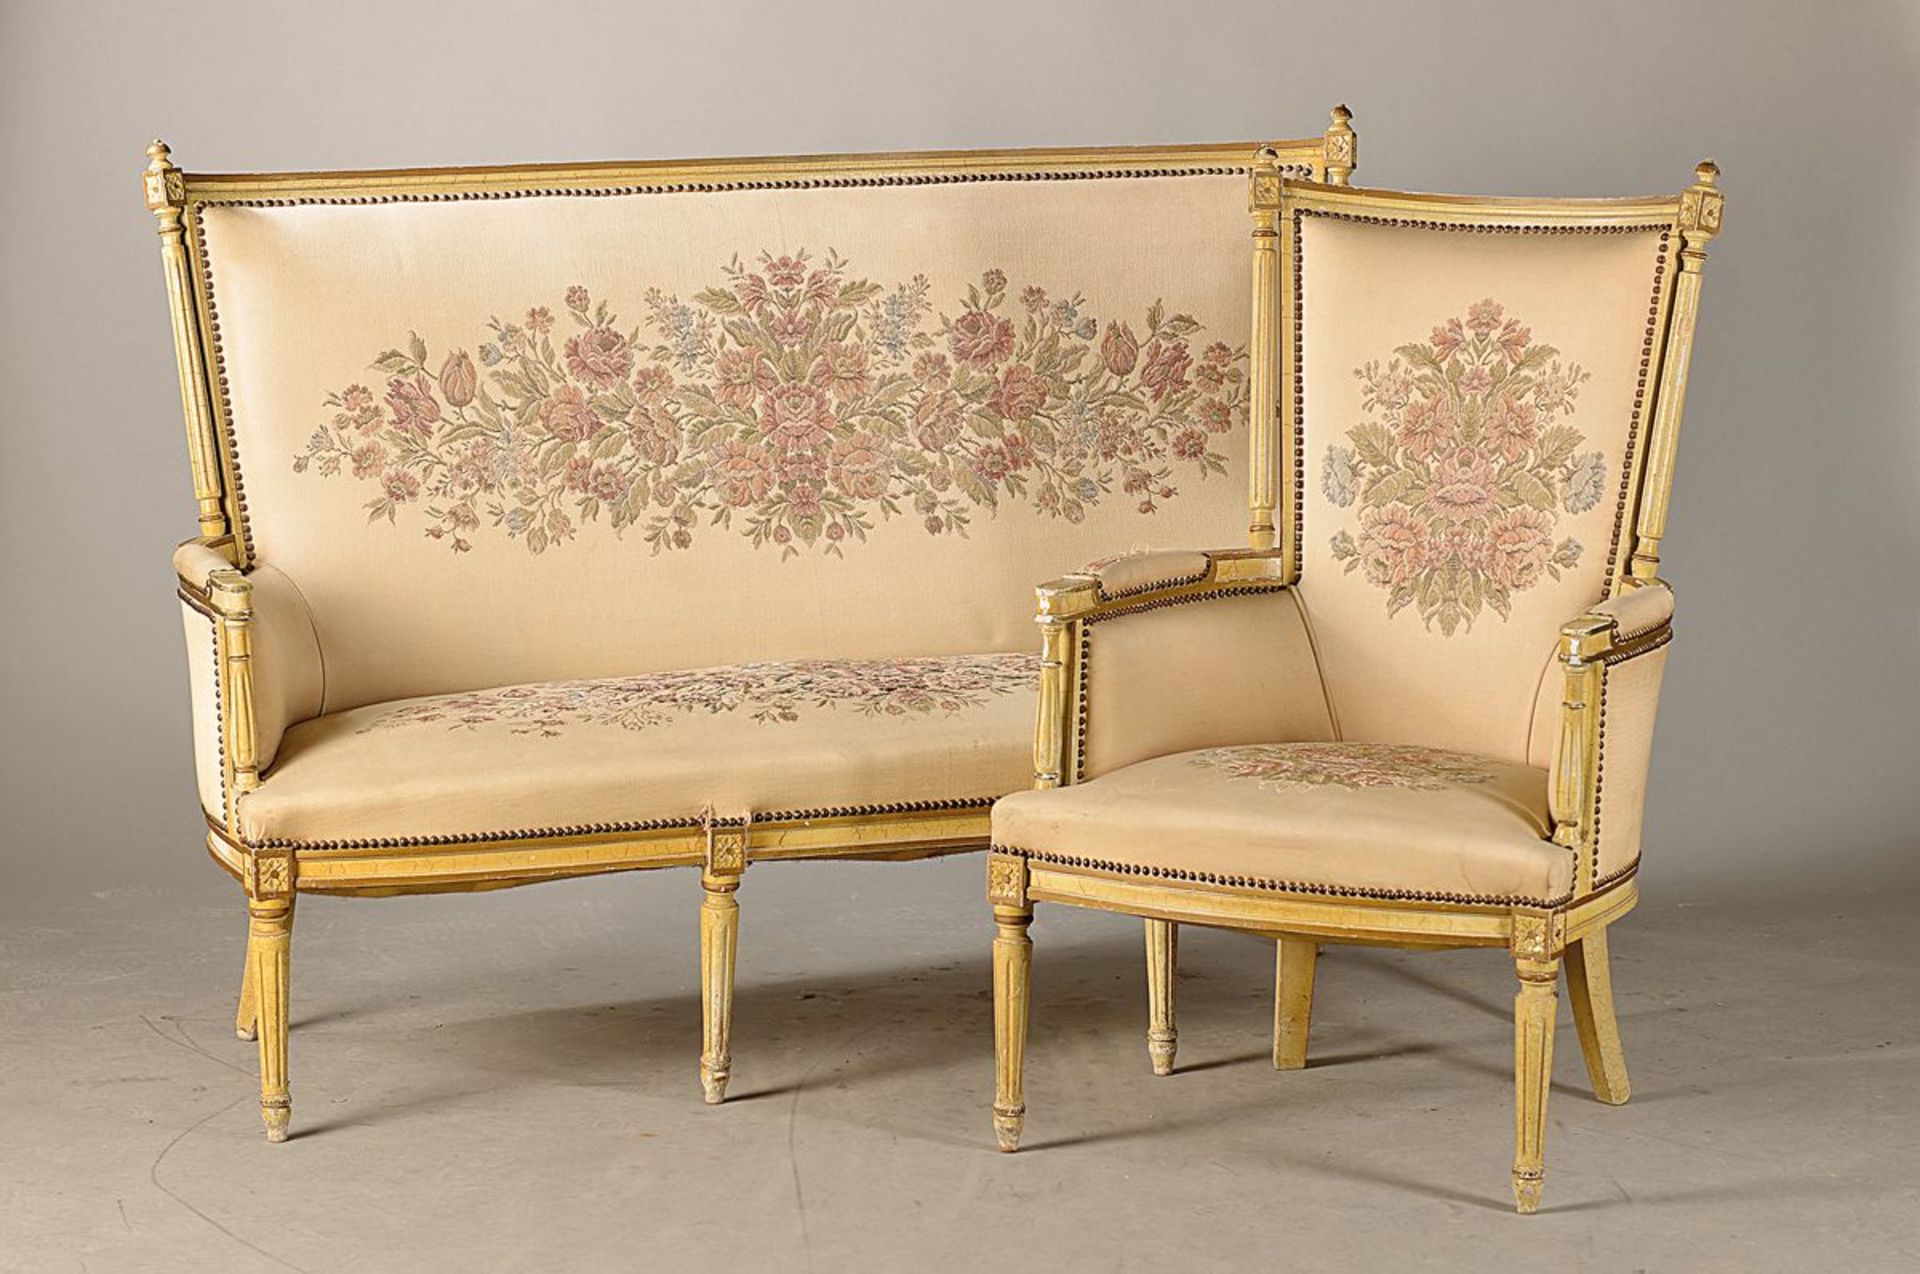 Salon group, Louis-Seize-style, around 1900, bench and two armchair, softwood light painted,